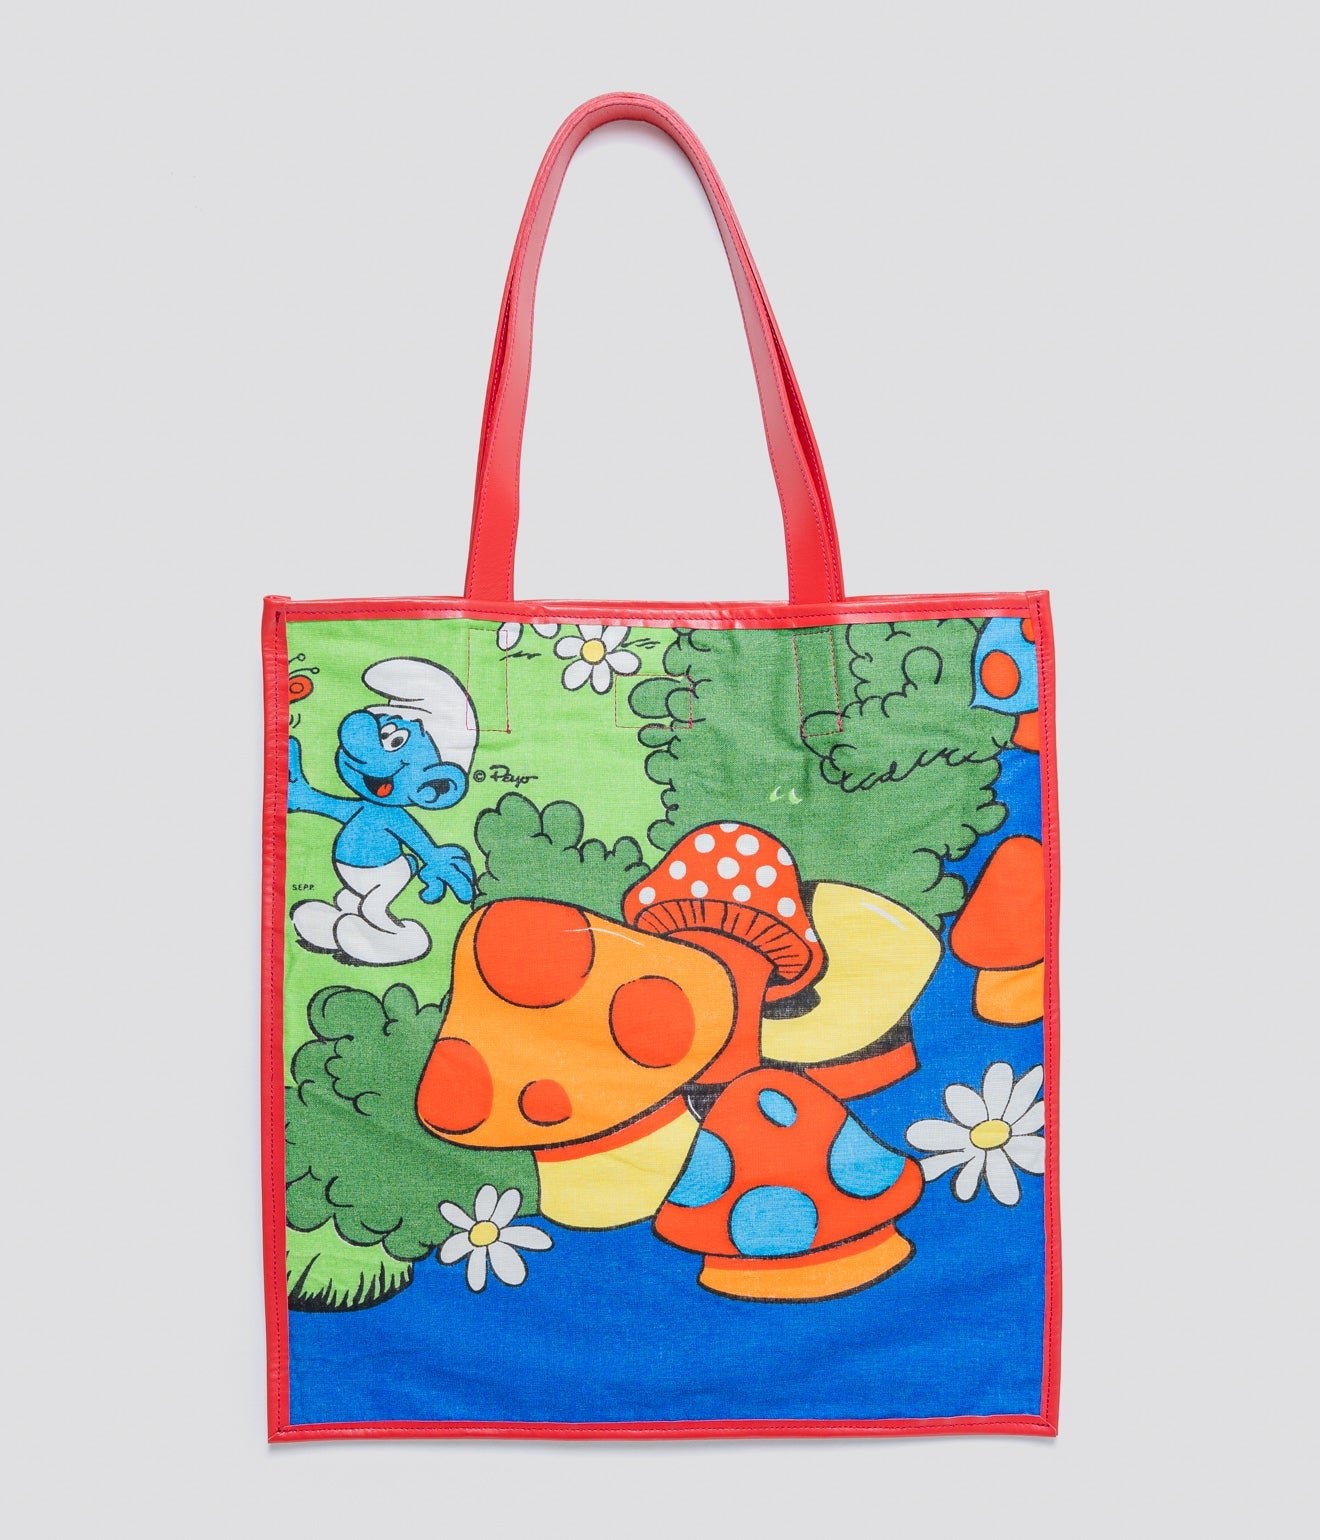 WEAREALLANIMALS UPCYCLE ”Piping Flat Tote -Vintage Smurf Fabric-" #10 - WEAREALLANIMALS